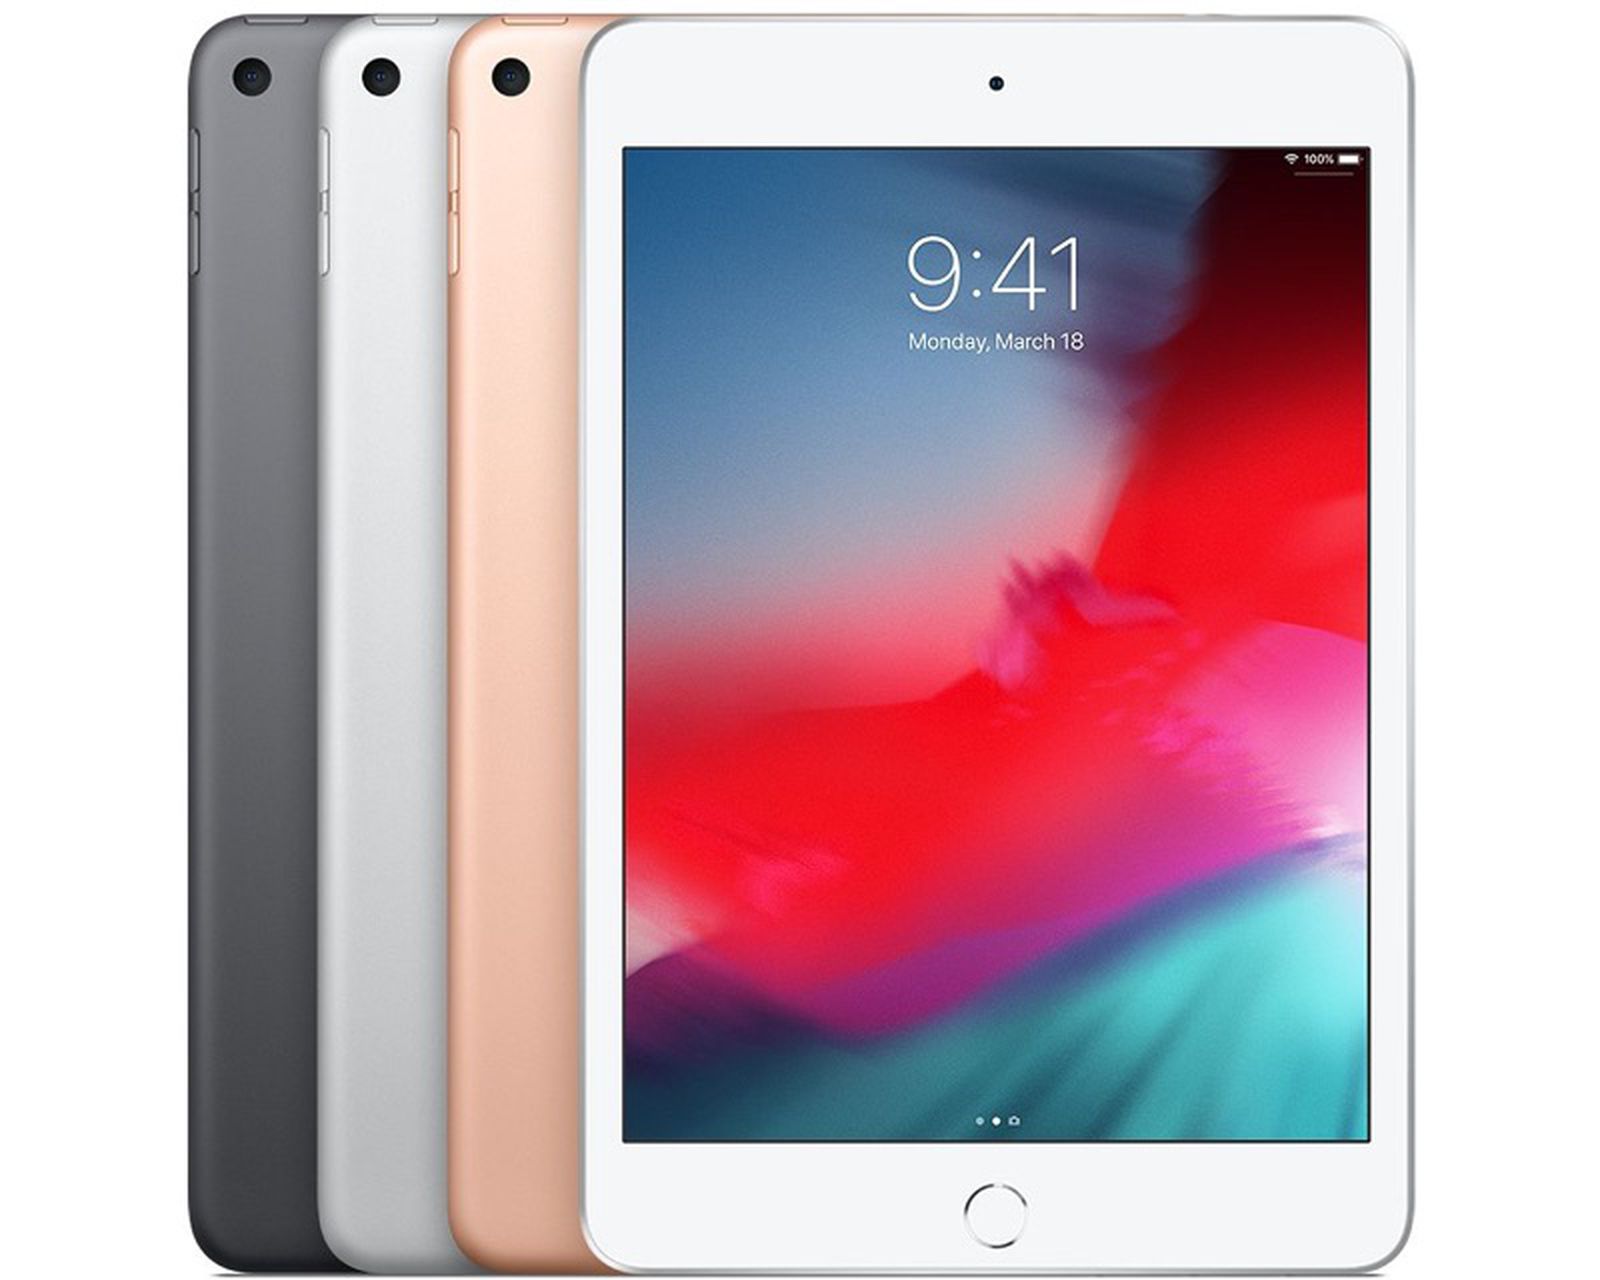 Sixth-generation iPad Mini with an 8.4-inch screen with slimmer frames, launch expected March